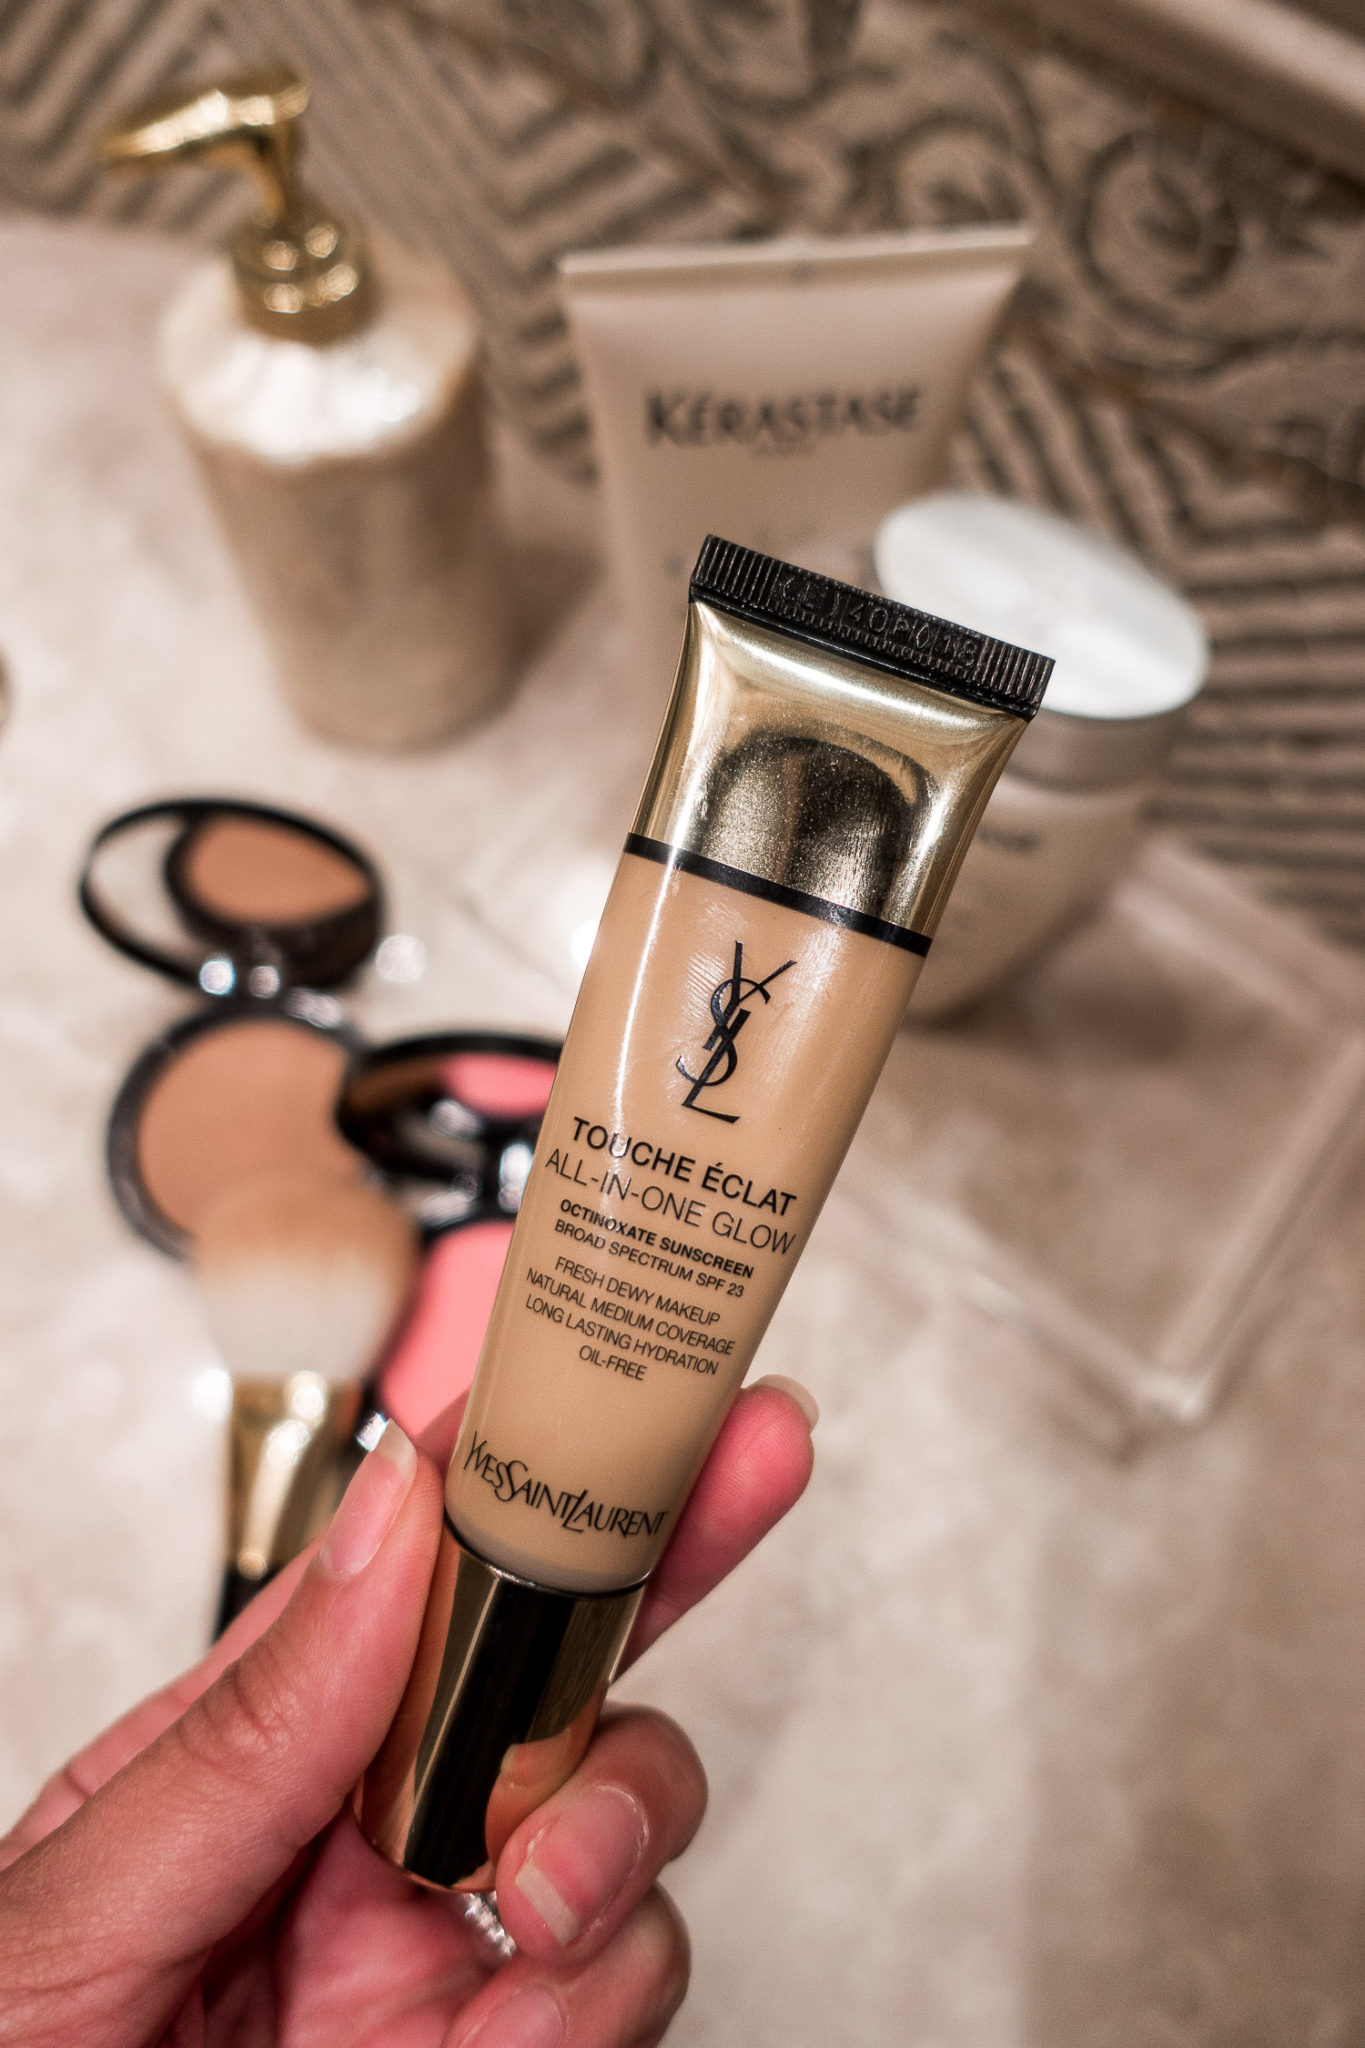 YSL Touche Eclat All in One Glow foundation review